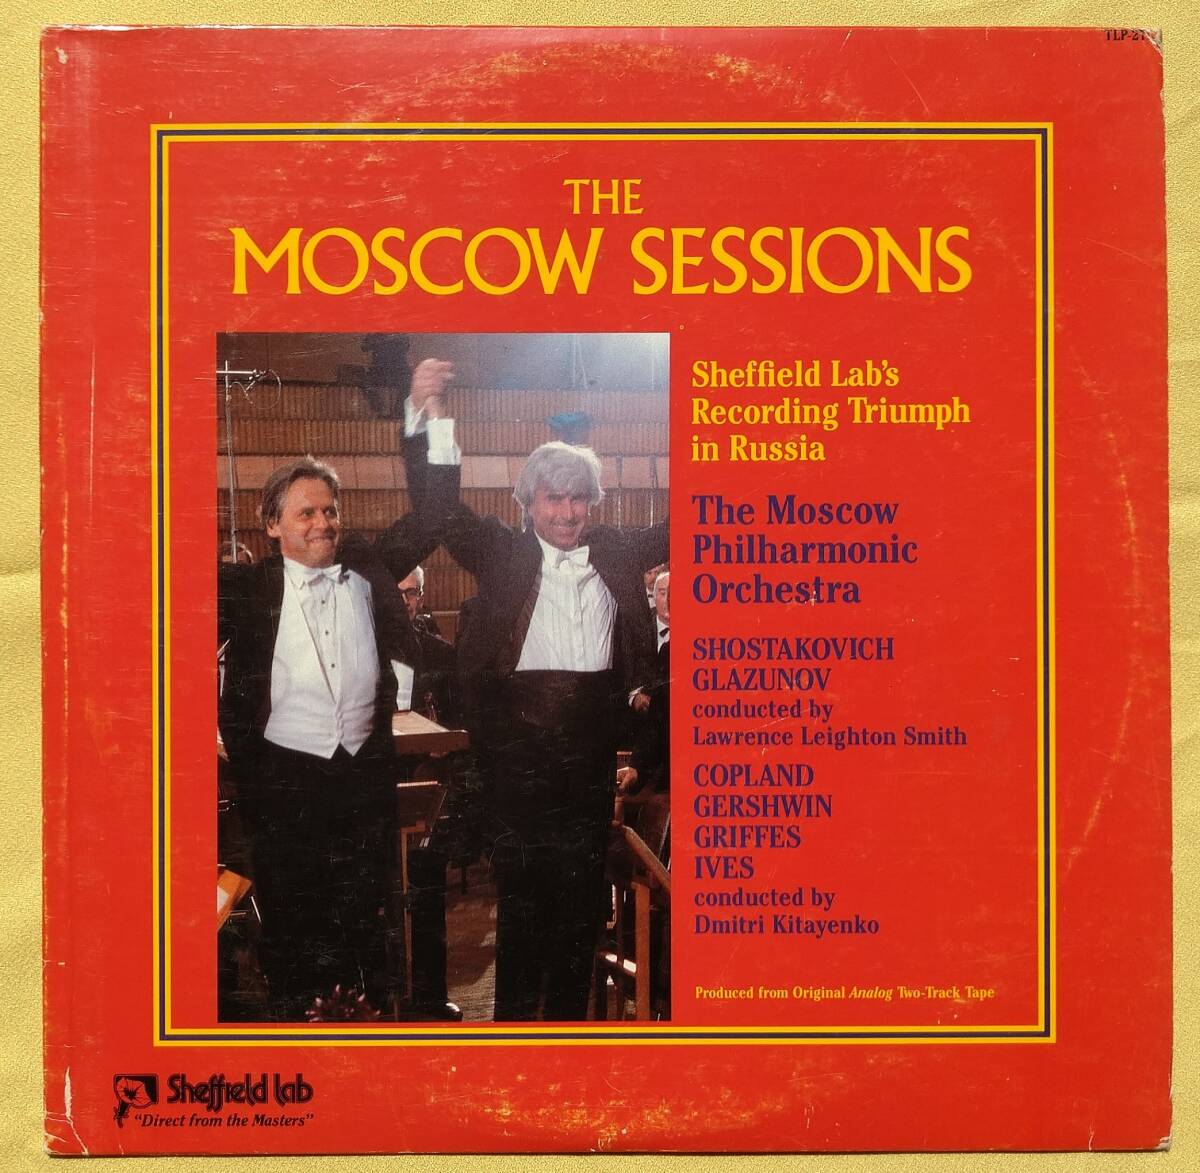 THE MOSCOW SESSIONS / The Moscow Philharmonic Orchestra - SHEFFILED LAB TLP27 キタエンコ、レイトン・スミス US盤の画像1